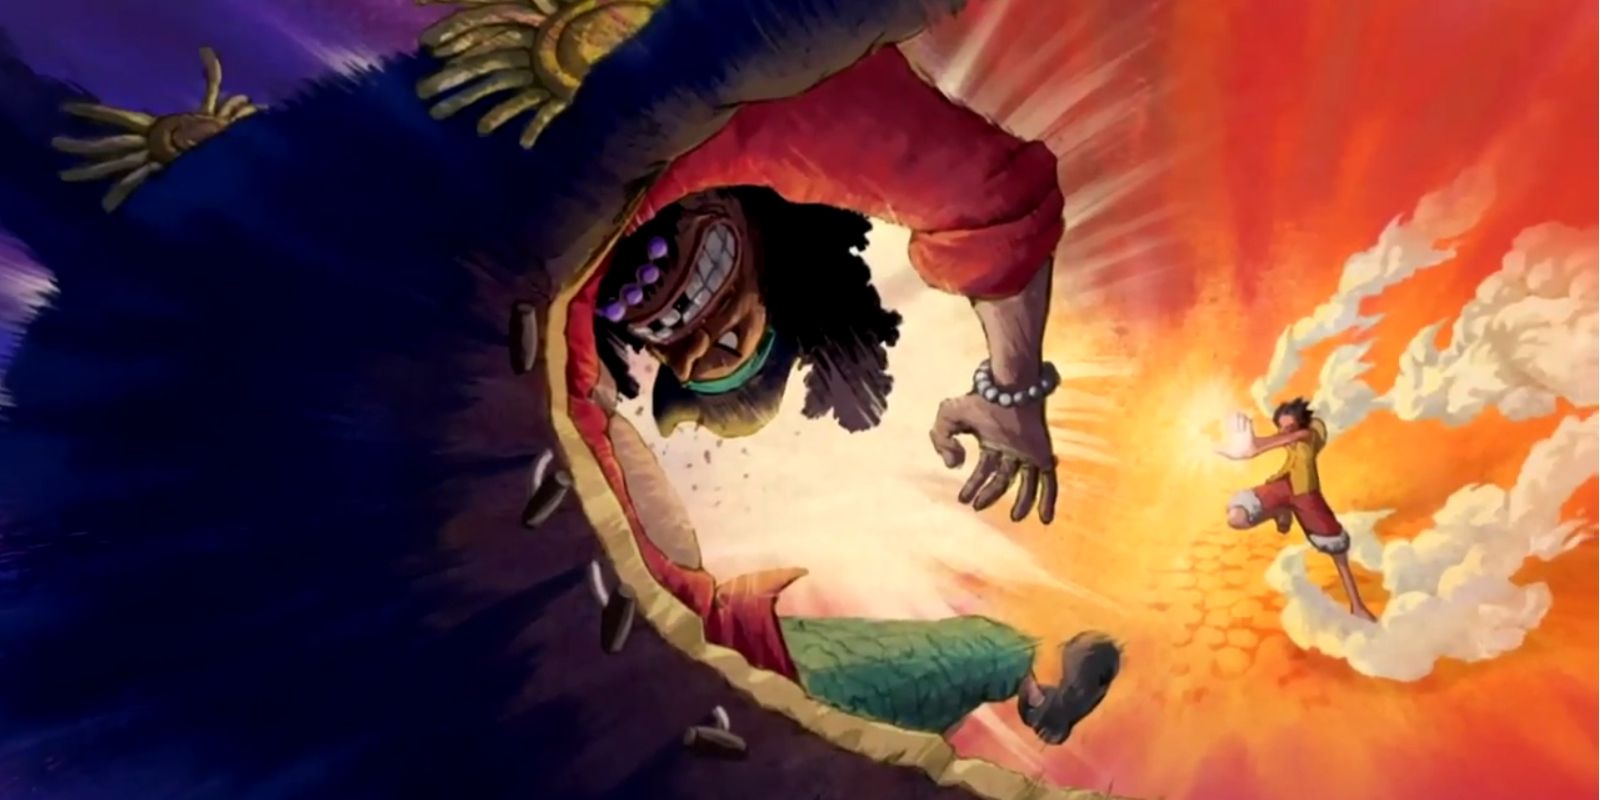 An image from One Piece's anime of Luffy using a 2nd Gear attack against Blackbeard who seems very hurt by the attack.